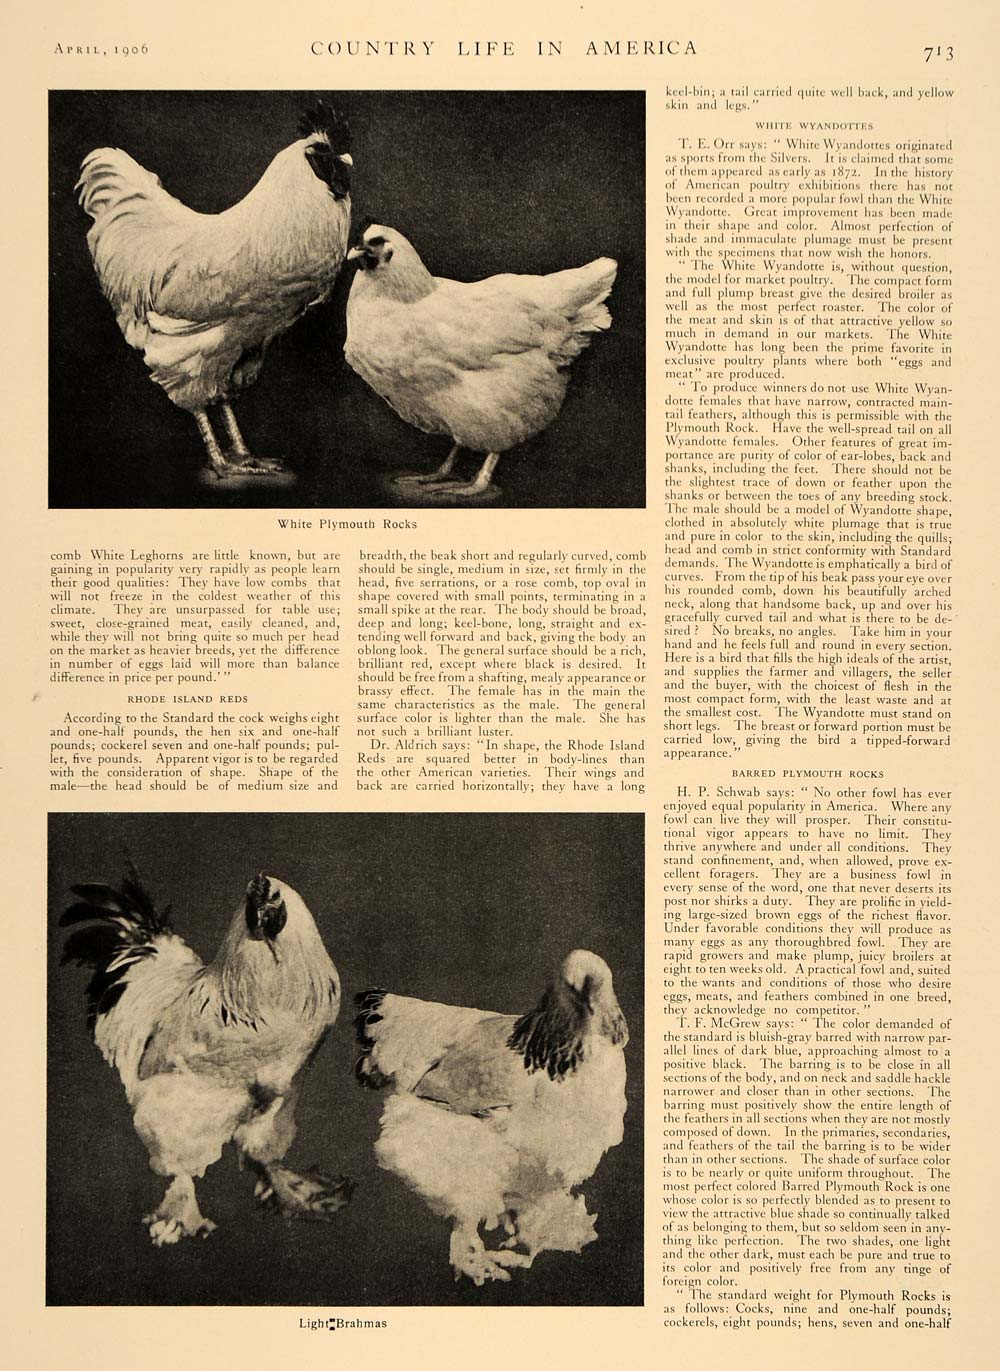 1906 Article Blue Ribbon Champion Poultry Agriculture Orpington Chickens CLA1